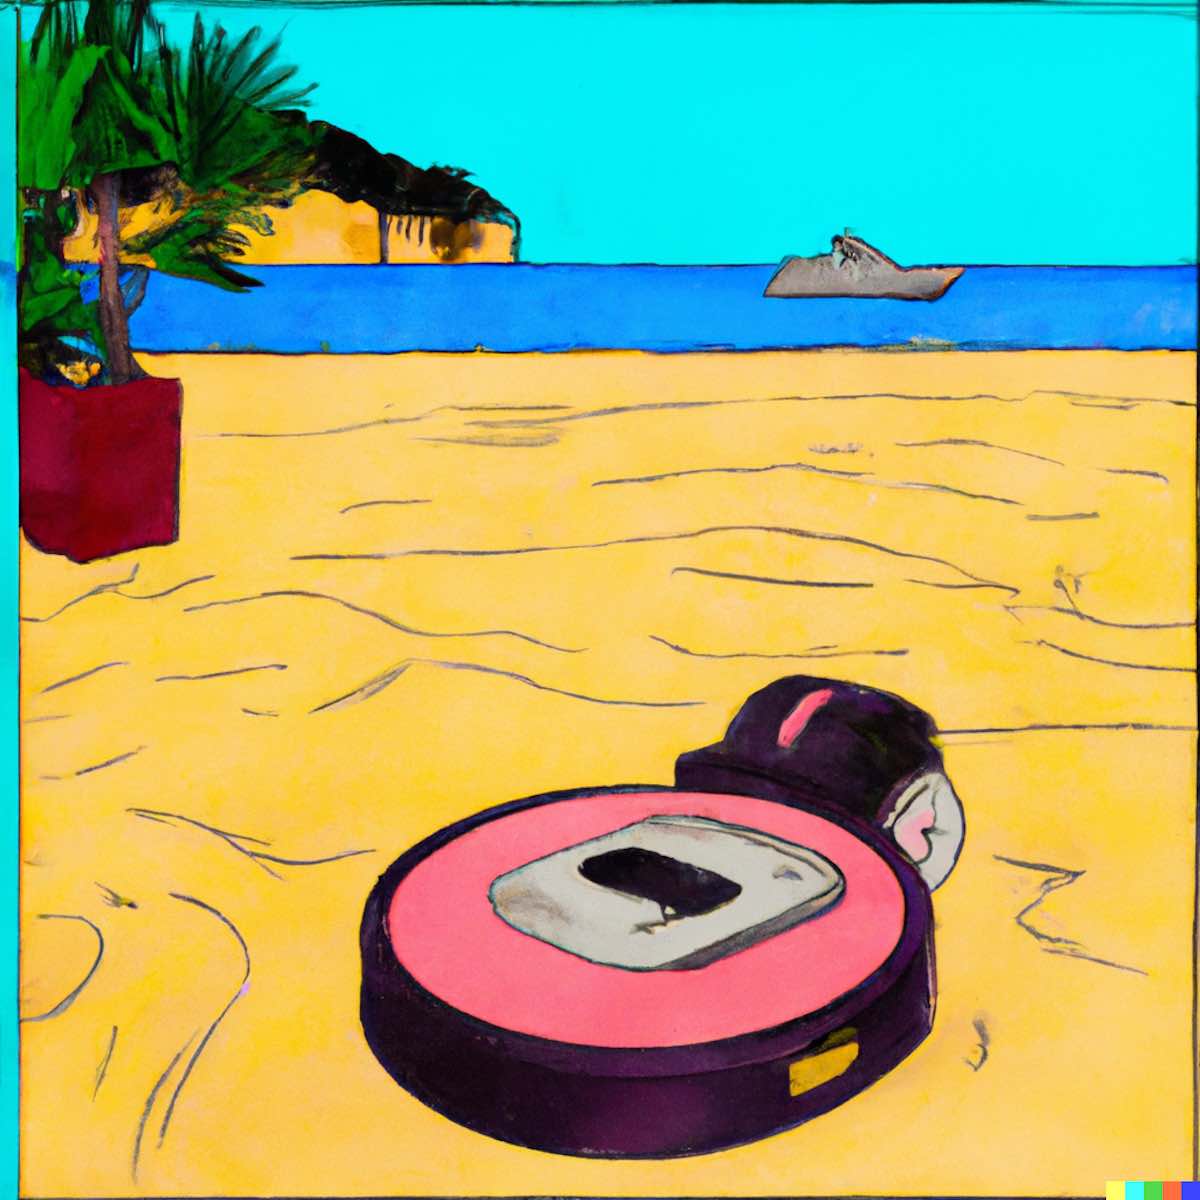 "Robotic vacuum cleaner at the beach" by Andy Warhol
